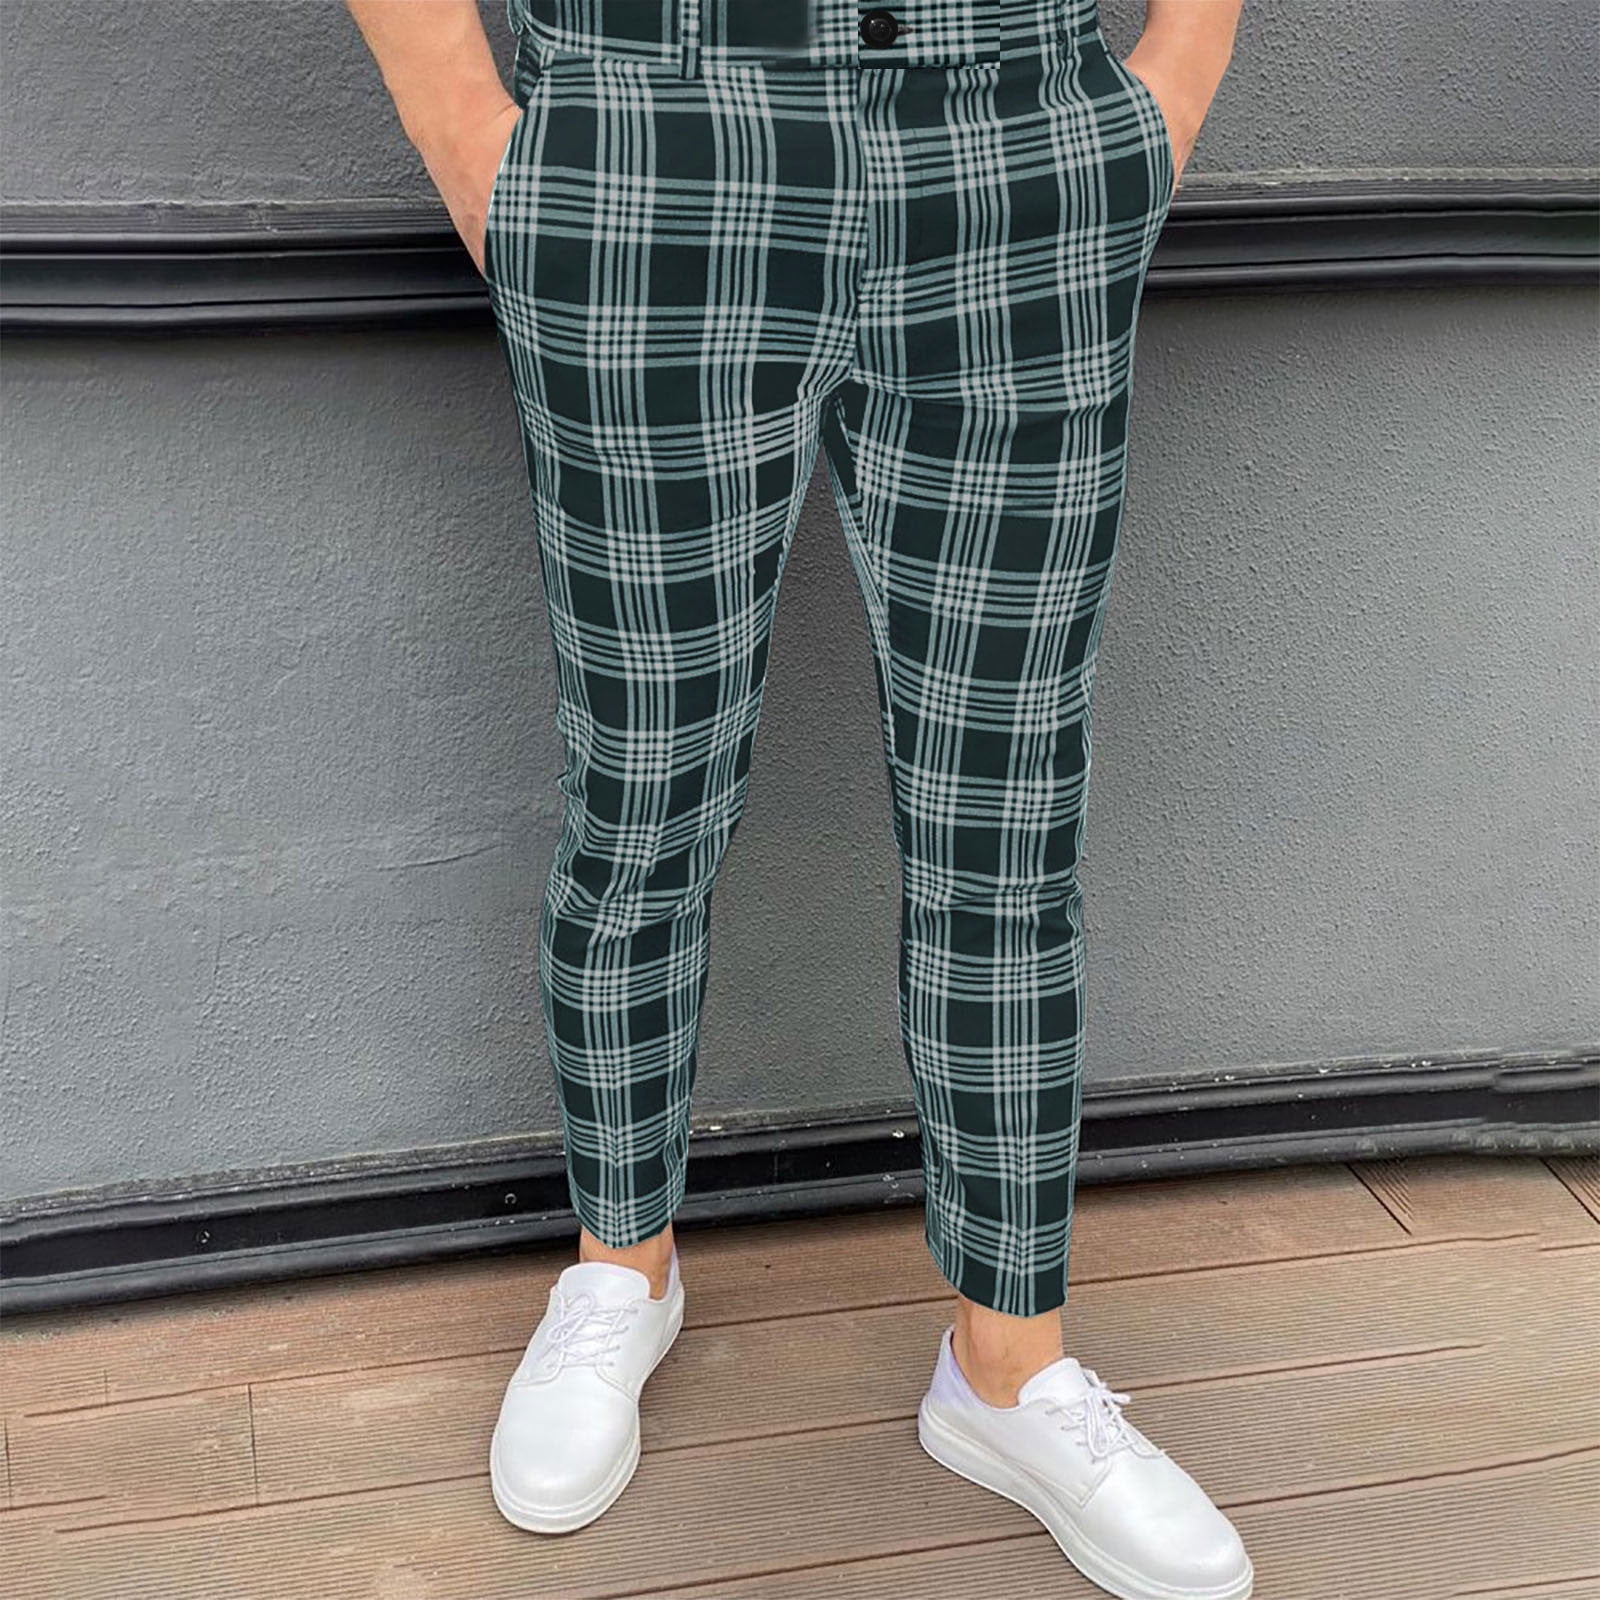 Men's Casual Pencil Pants Slim Fit Skinny Fashion Business Formal Loose  Trouse 